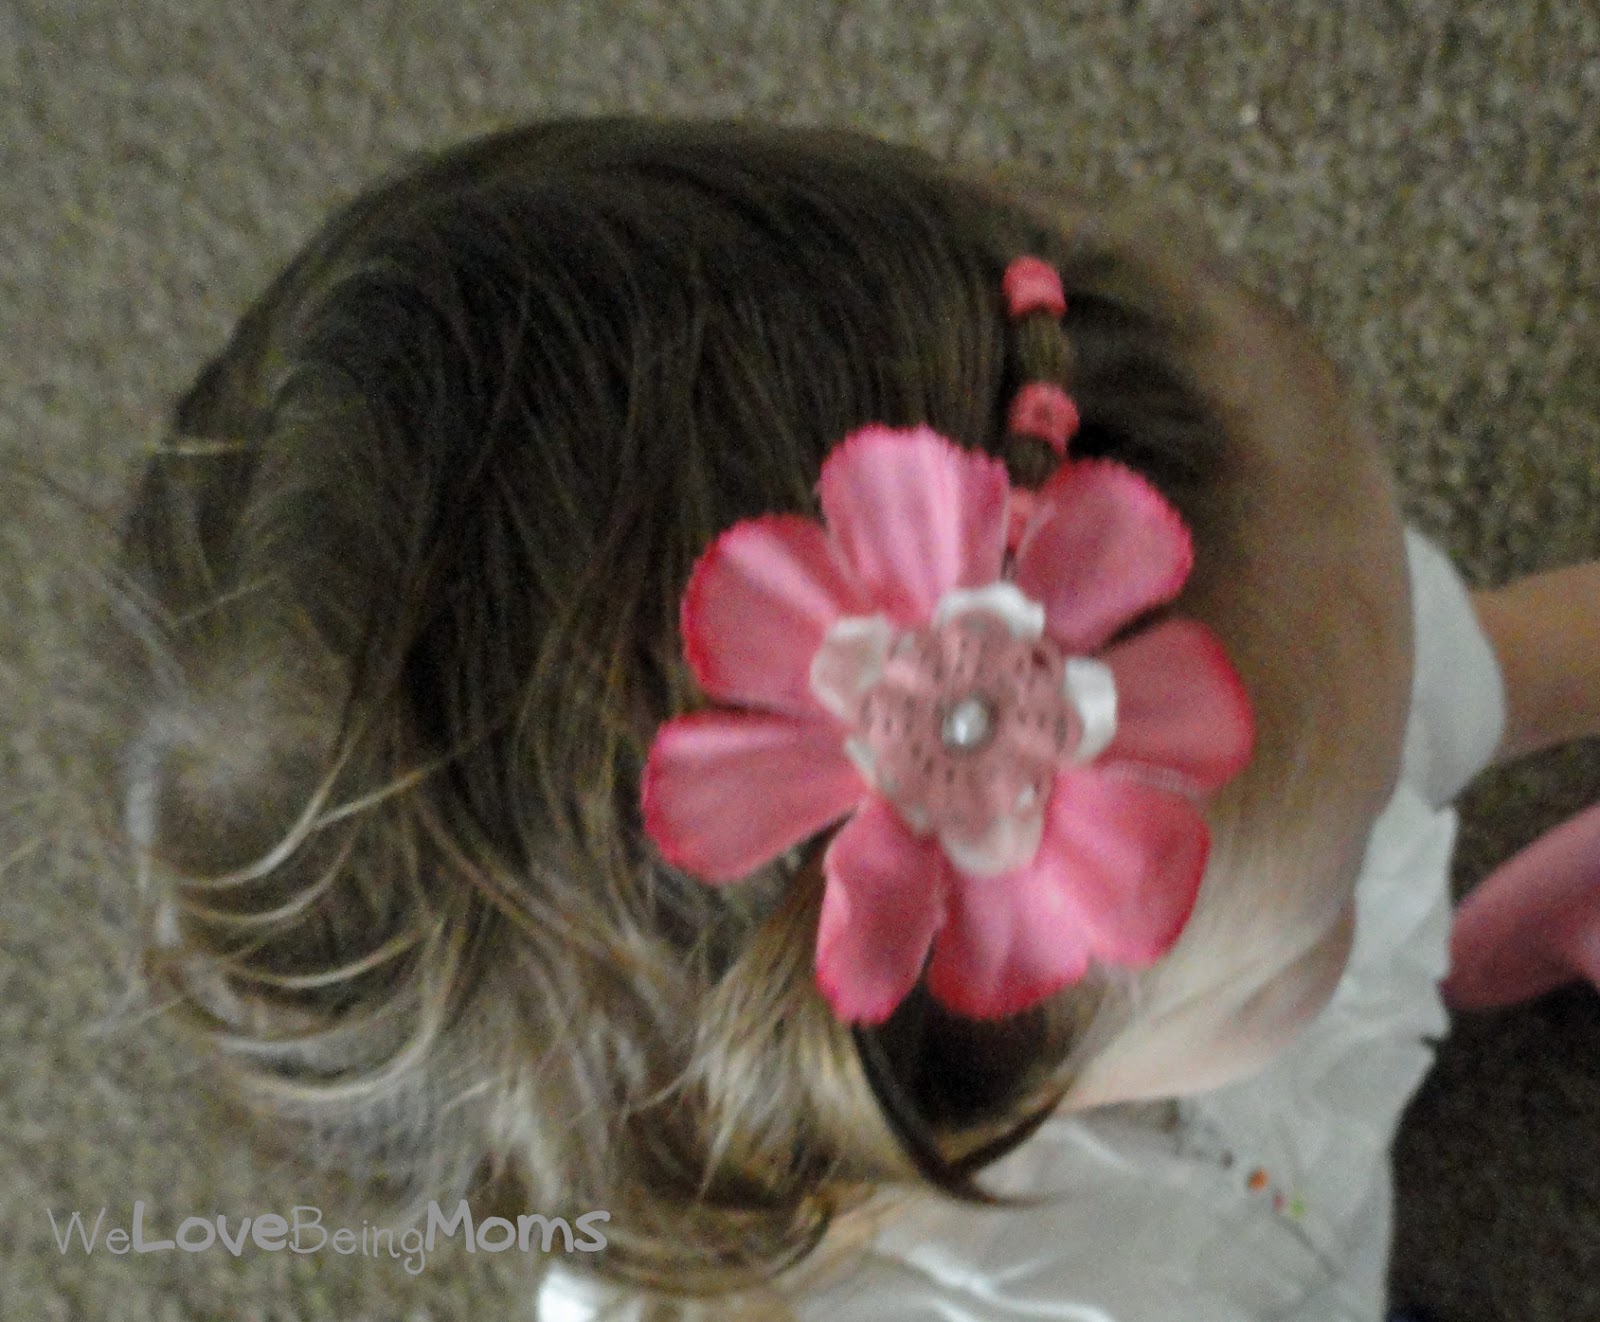 We Love Being Moms!: Toddler Hairstyles